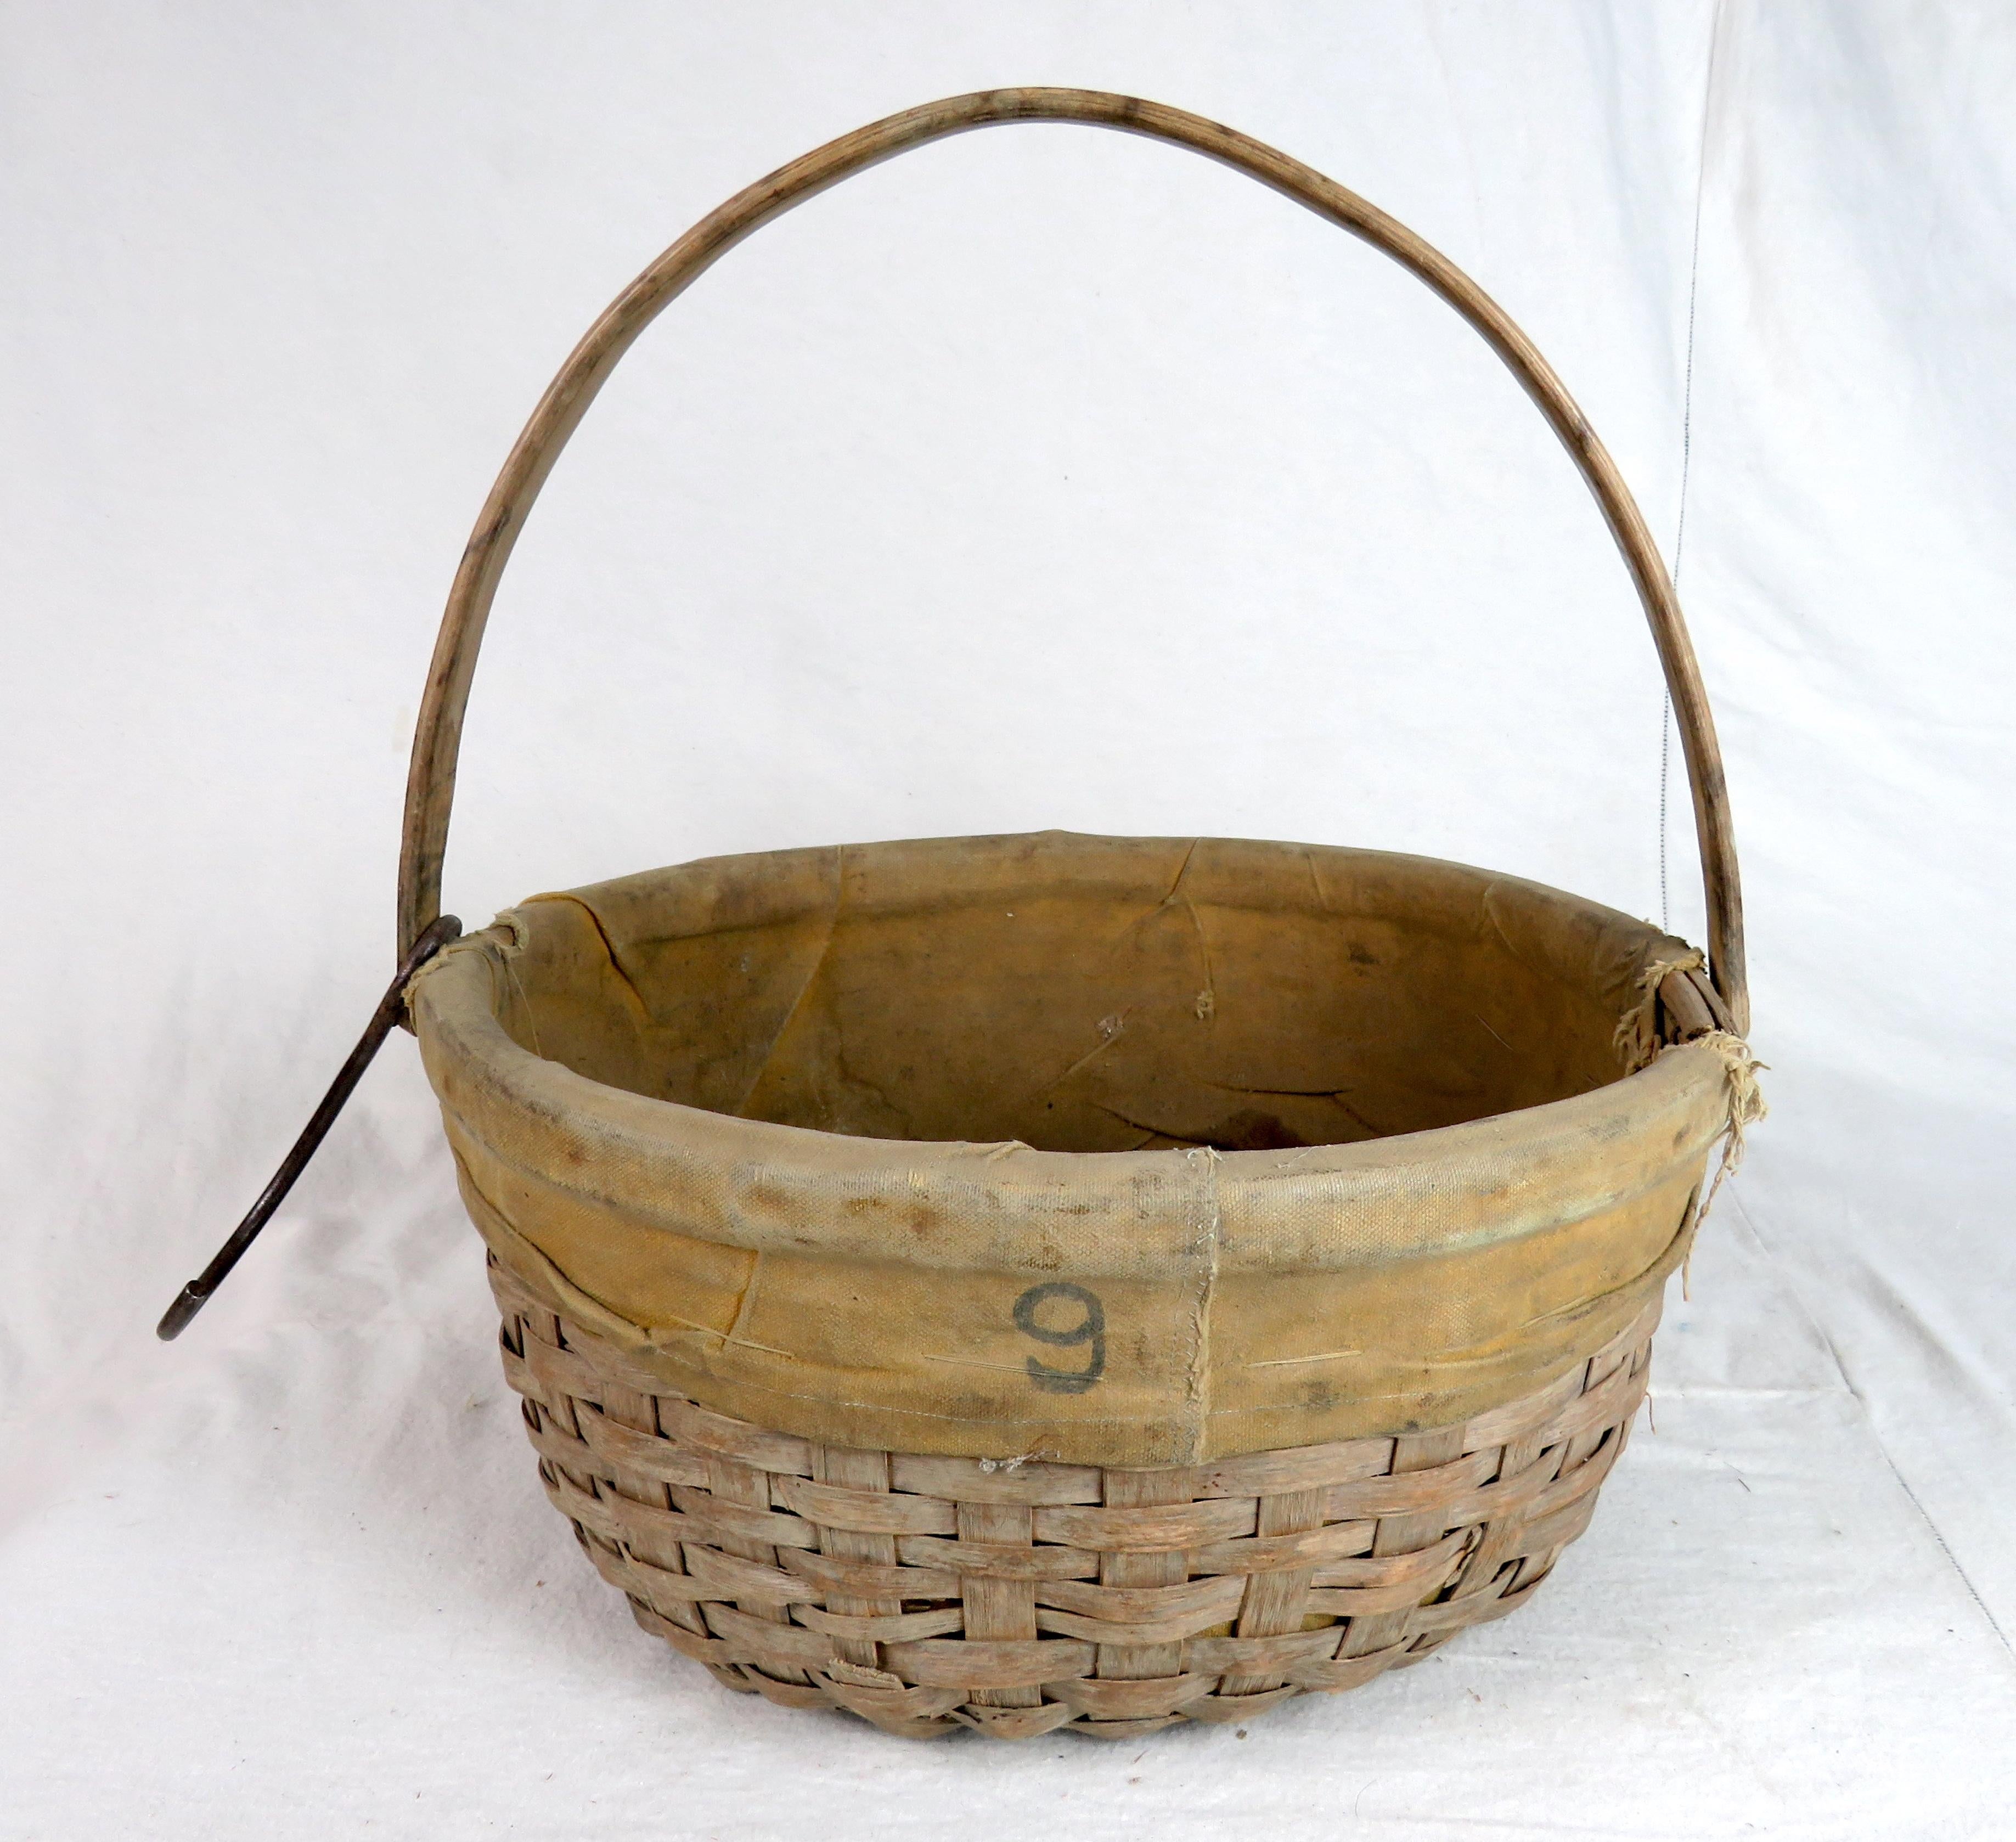 Turn of the century splint woven basket with swing handle, yellow canvas liner, and old hanging hook attached to its handle. Canvas with handwritten number 9 on one side and fraying at both handle connections from use.